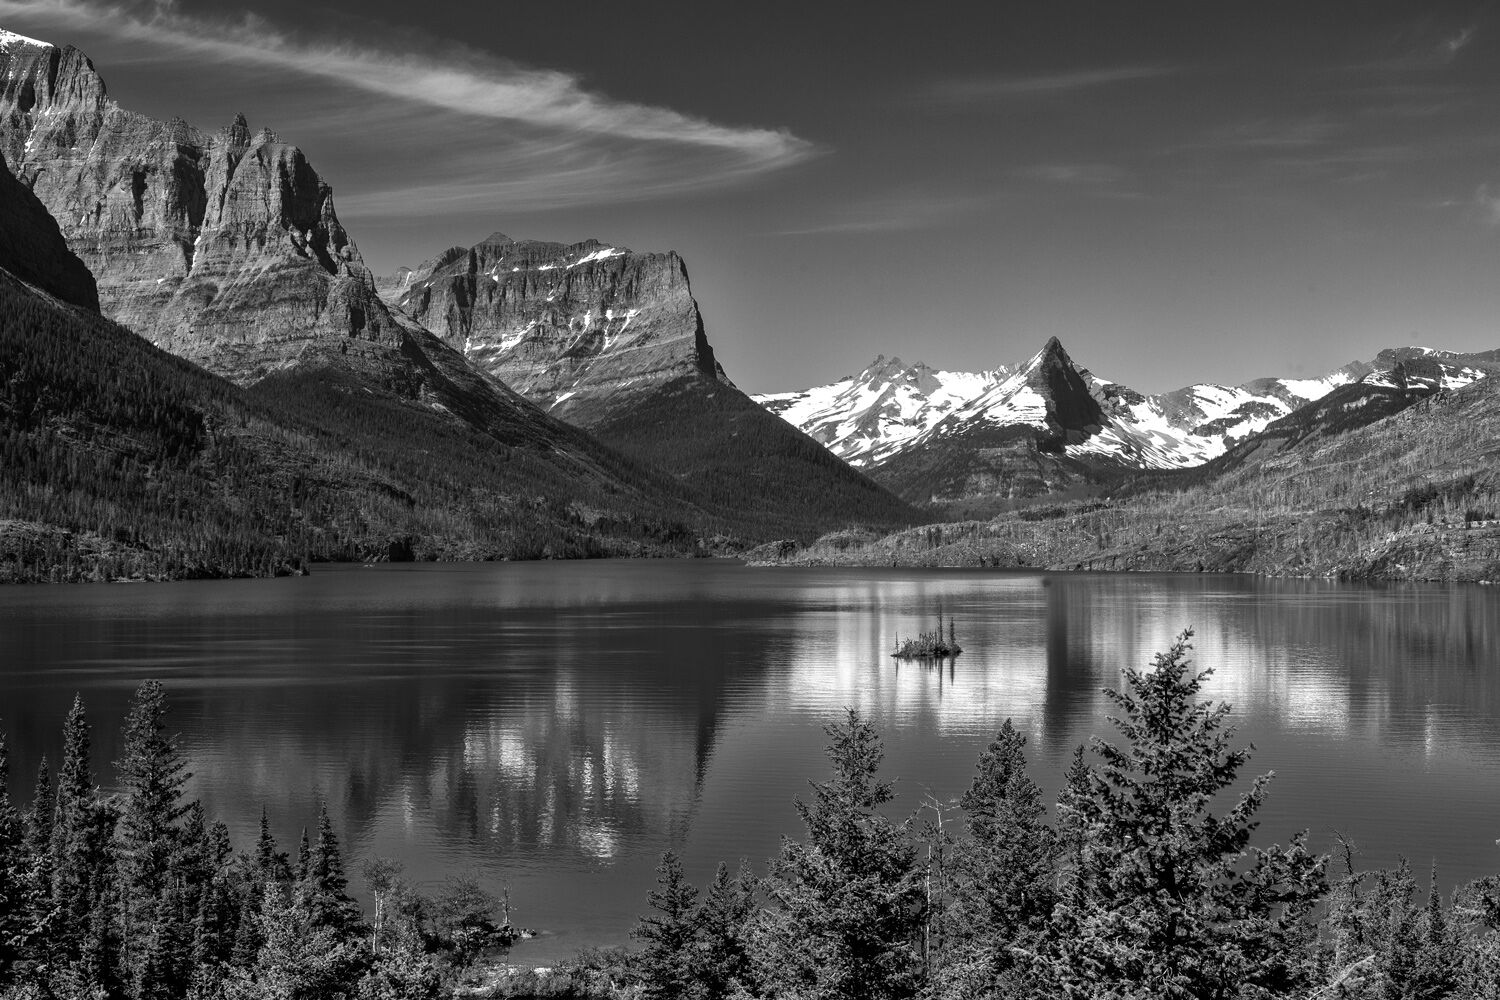 A classic view of Wild Goose Island and St. Mary Lake in Glacier National Park.